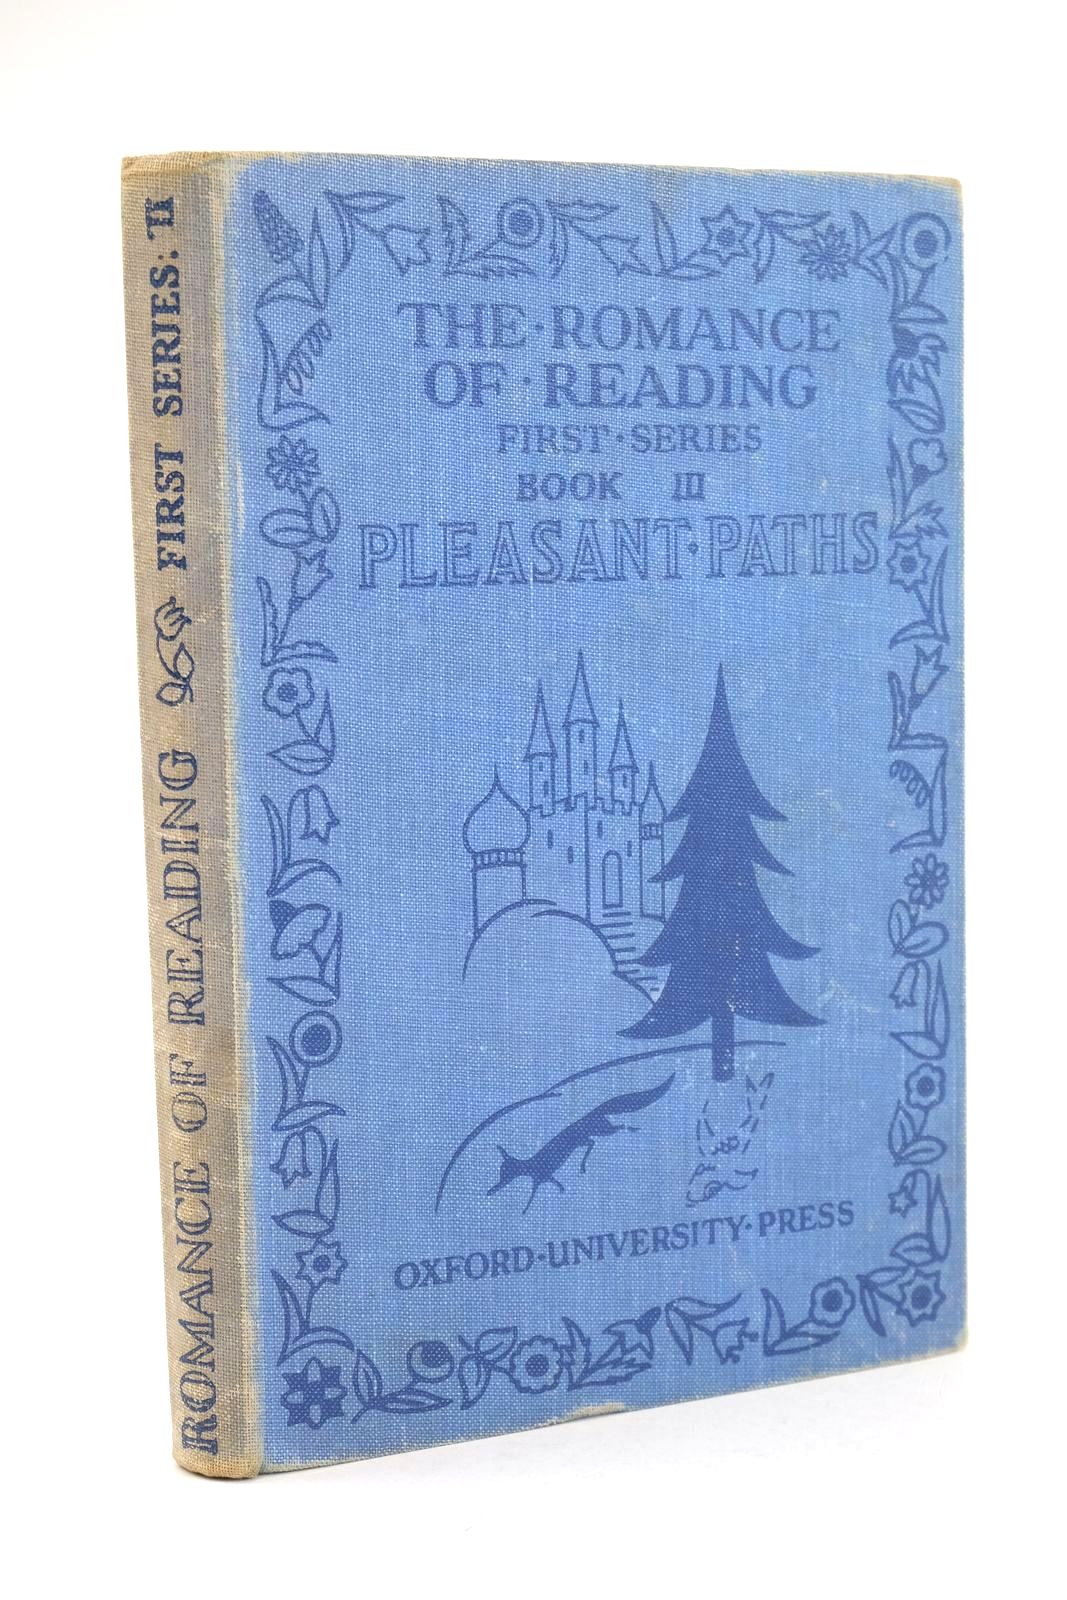 Photo of THE ROMANCE OF READING FIRST SERIES BOOK III PLEASANT PATHS written by Polkinghorne, R.K. Polkinghorne, M.I.R. illustrated by Watson, A.H. Harrison, Florence Jacobs, Helen Aris, Ernest A. et al., published by Oxford University Press (STOCK CODE: 1324630)  for sale by Stella & Rose's Books